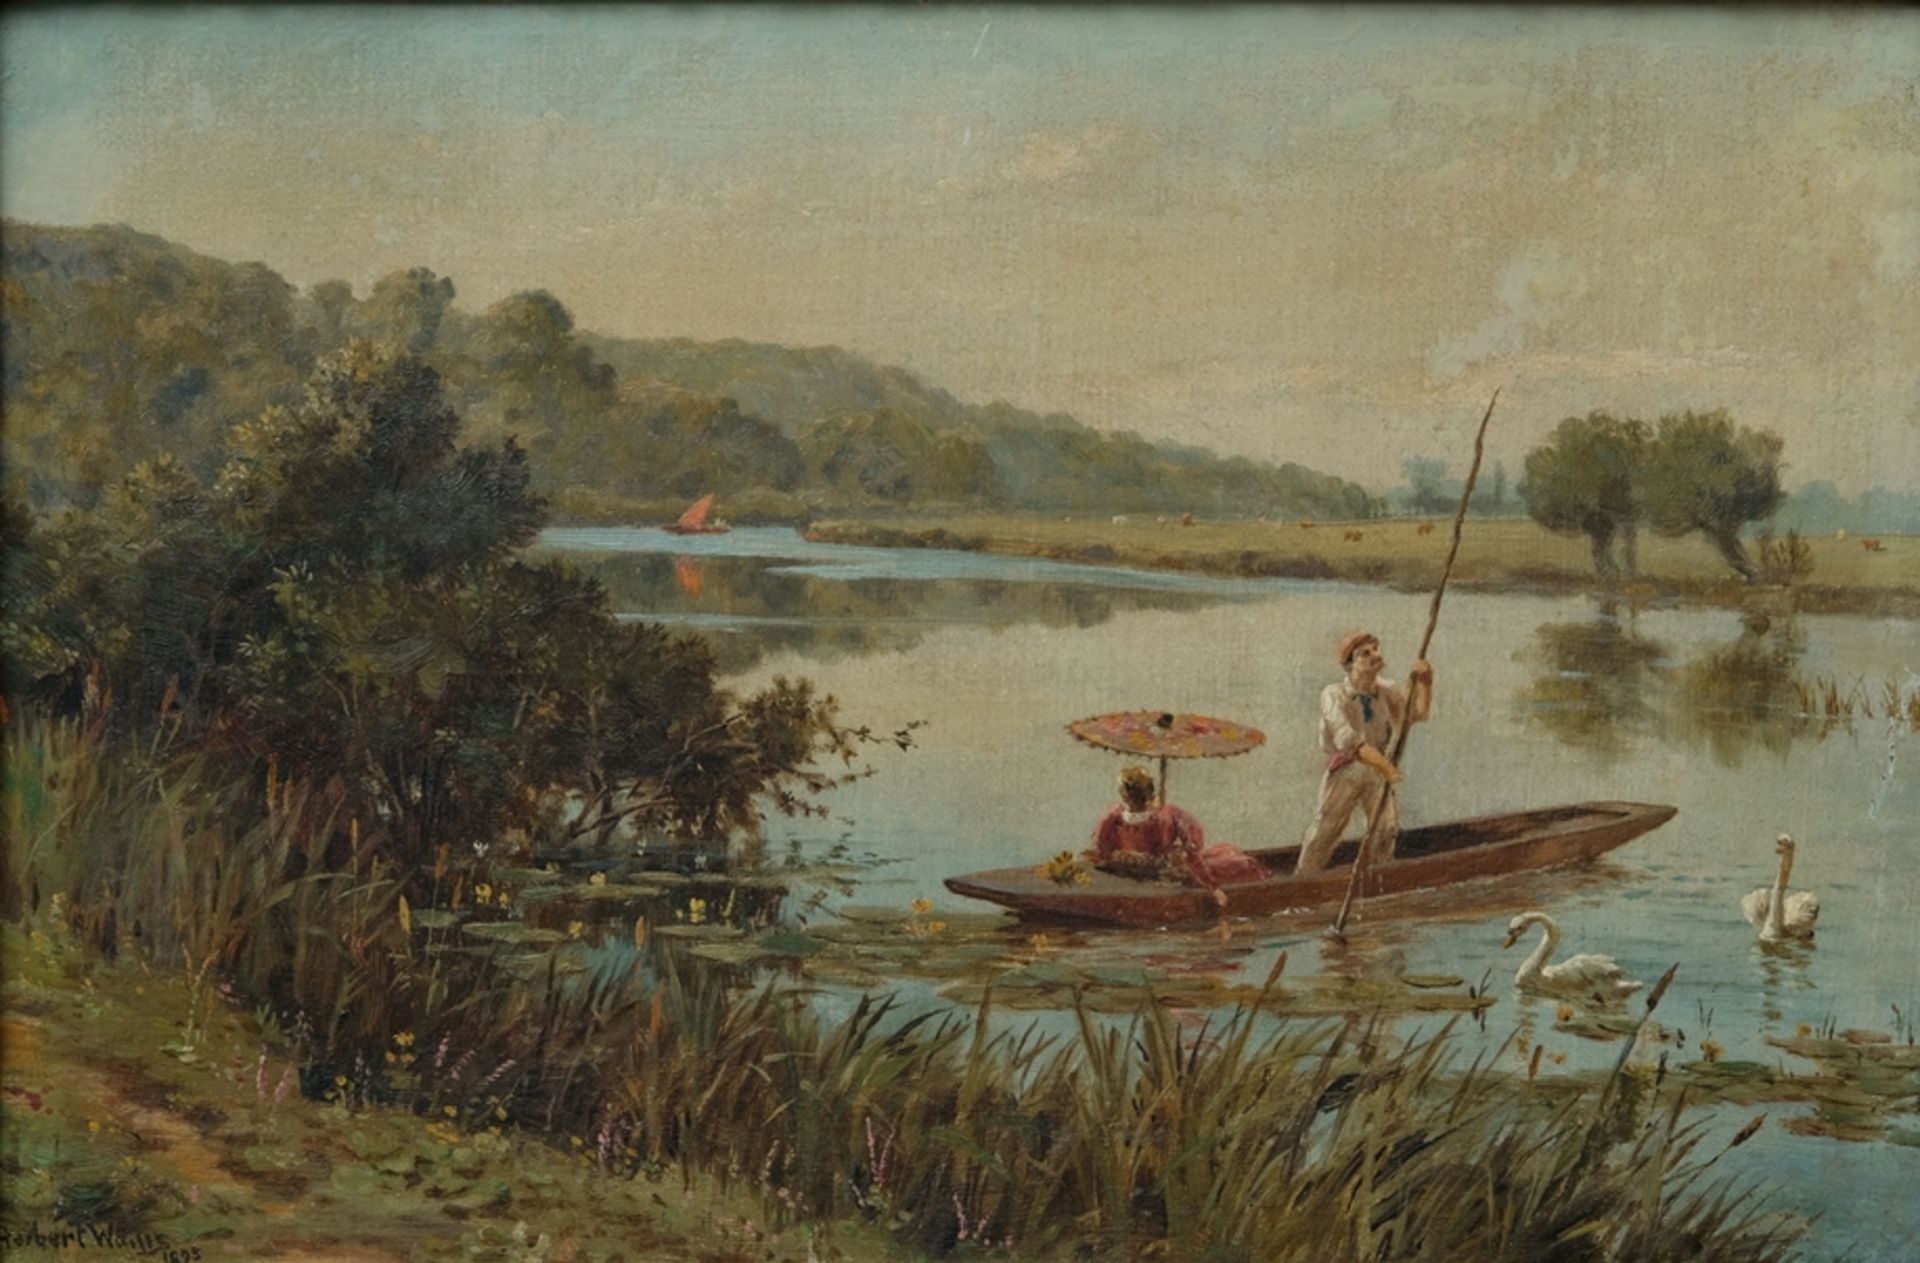 Wailis, Herbert, Couple floating in a punt, 1895, oil on canvas. 